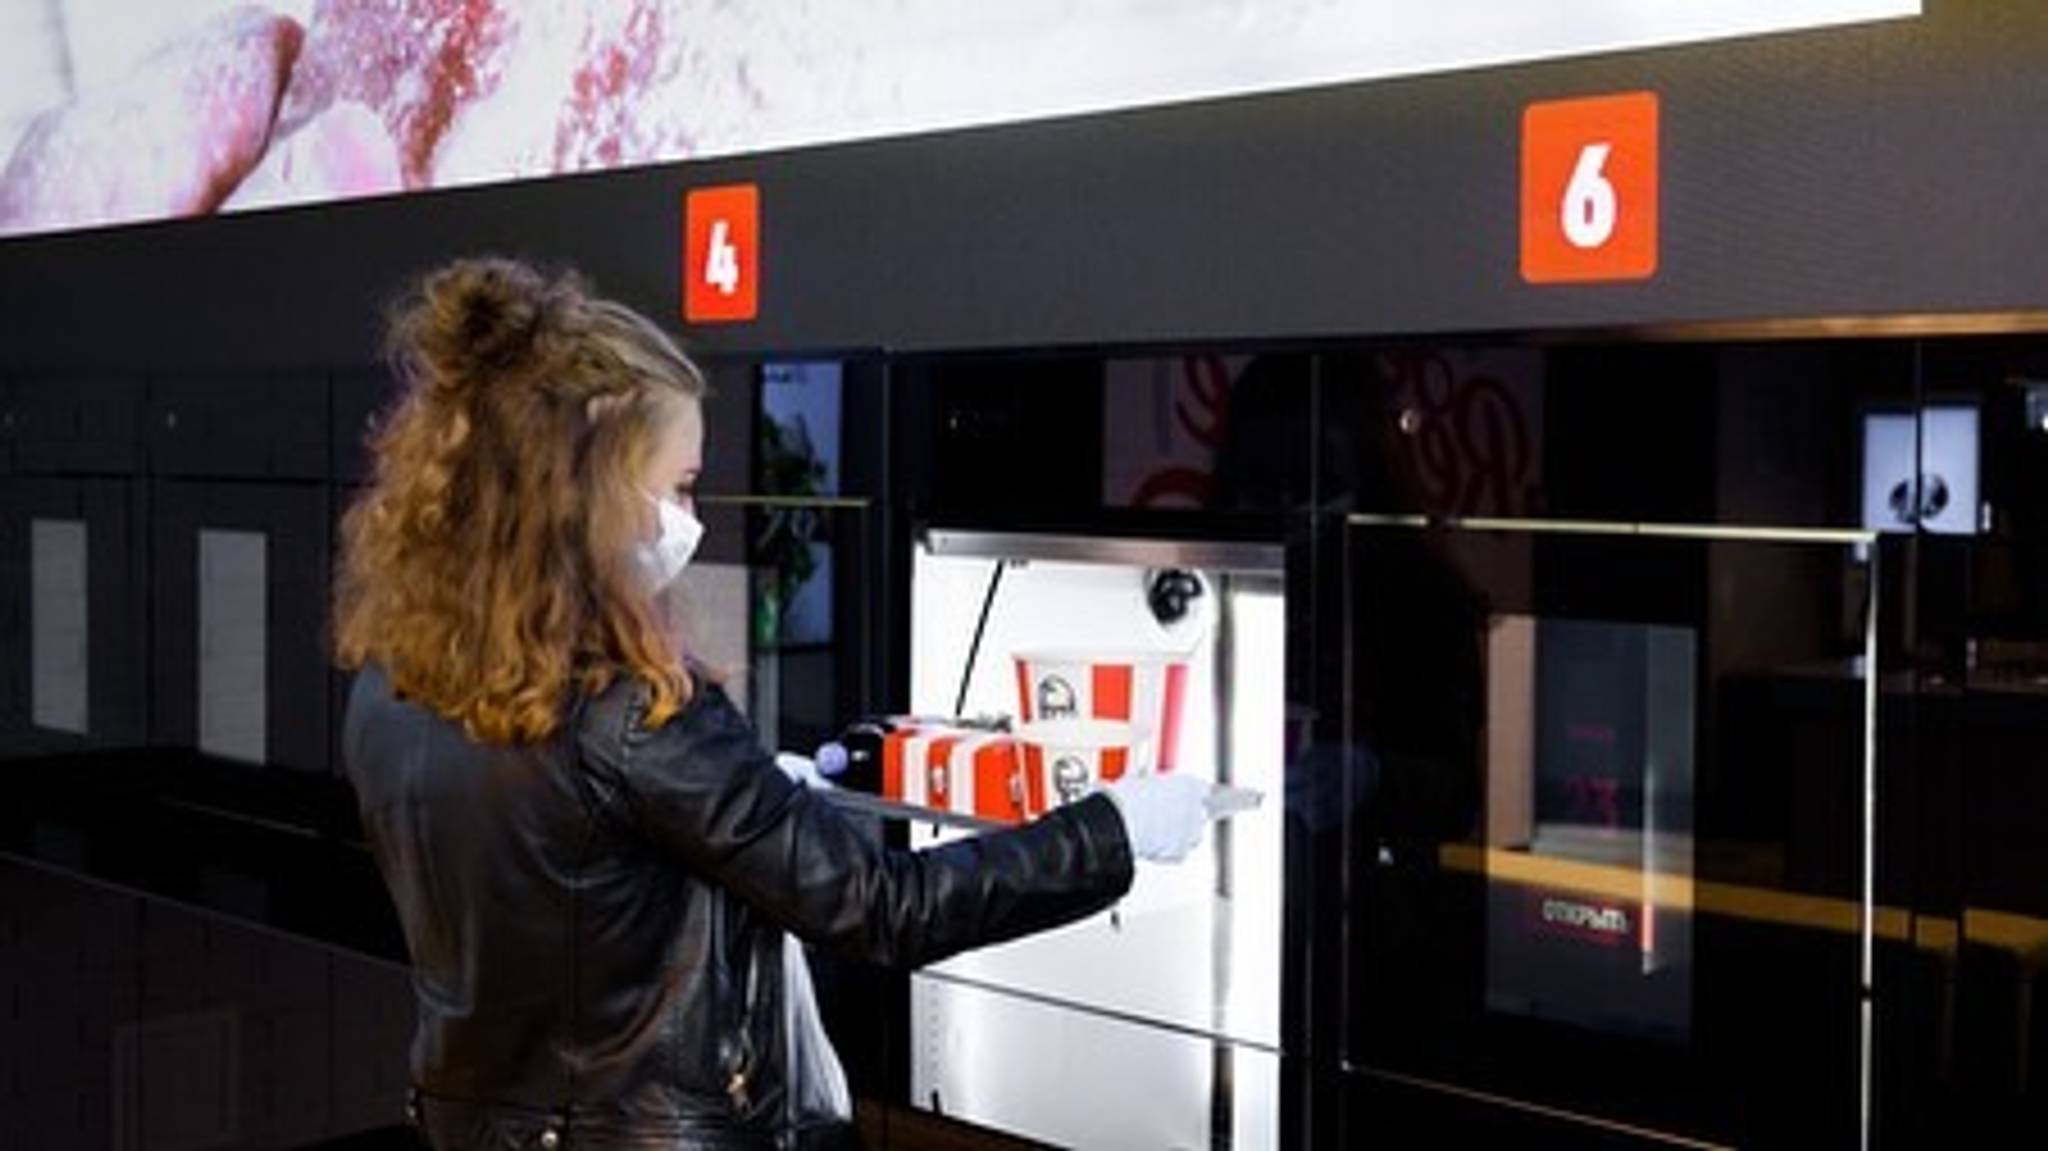 KFC Moscow goes all in for hygiene with robot servers